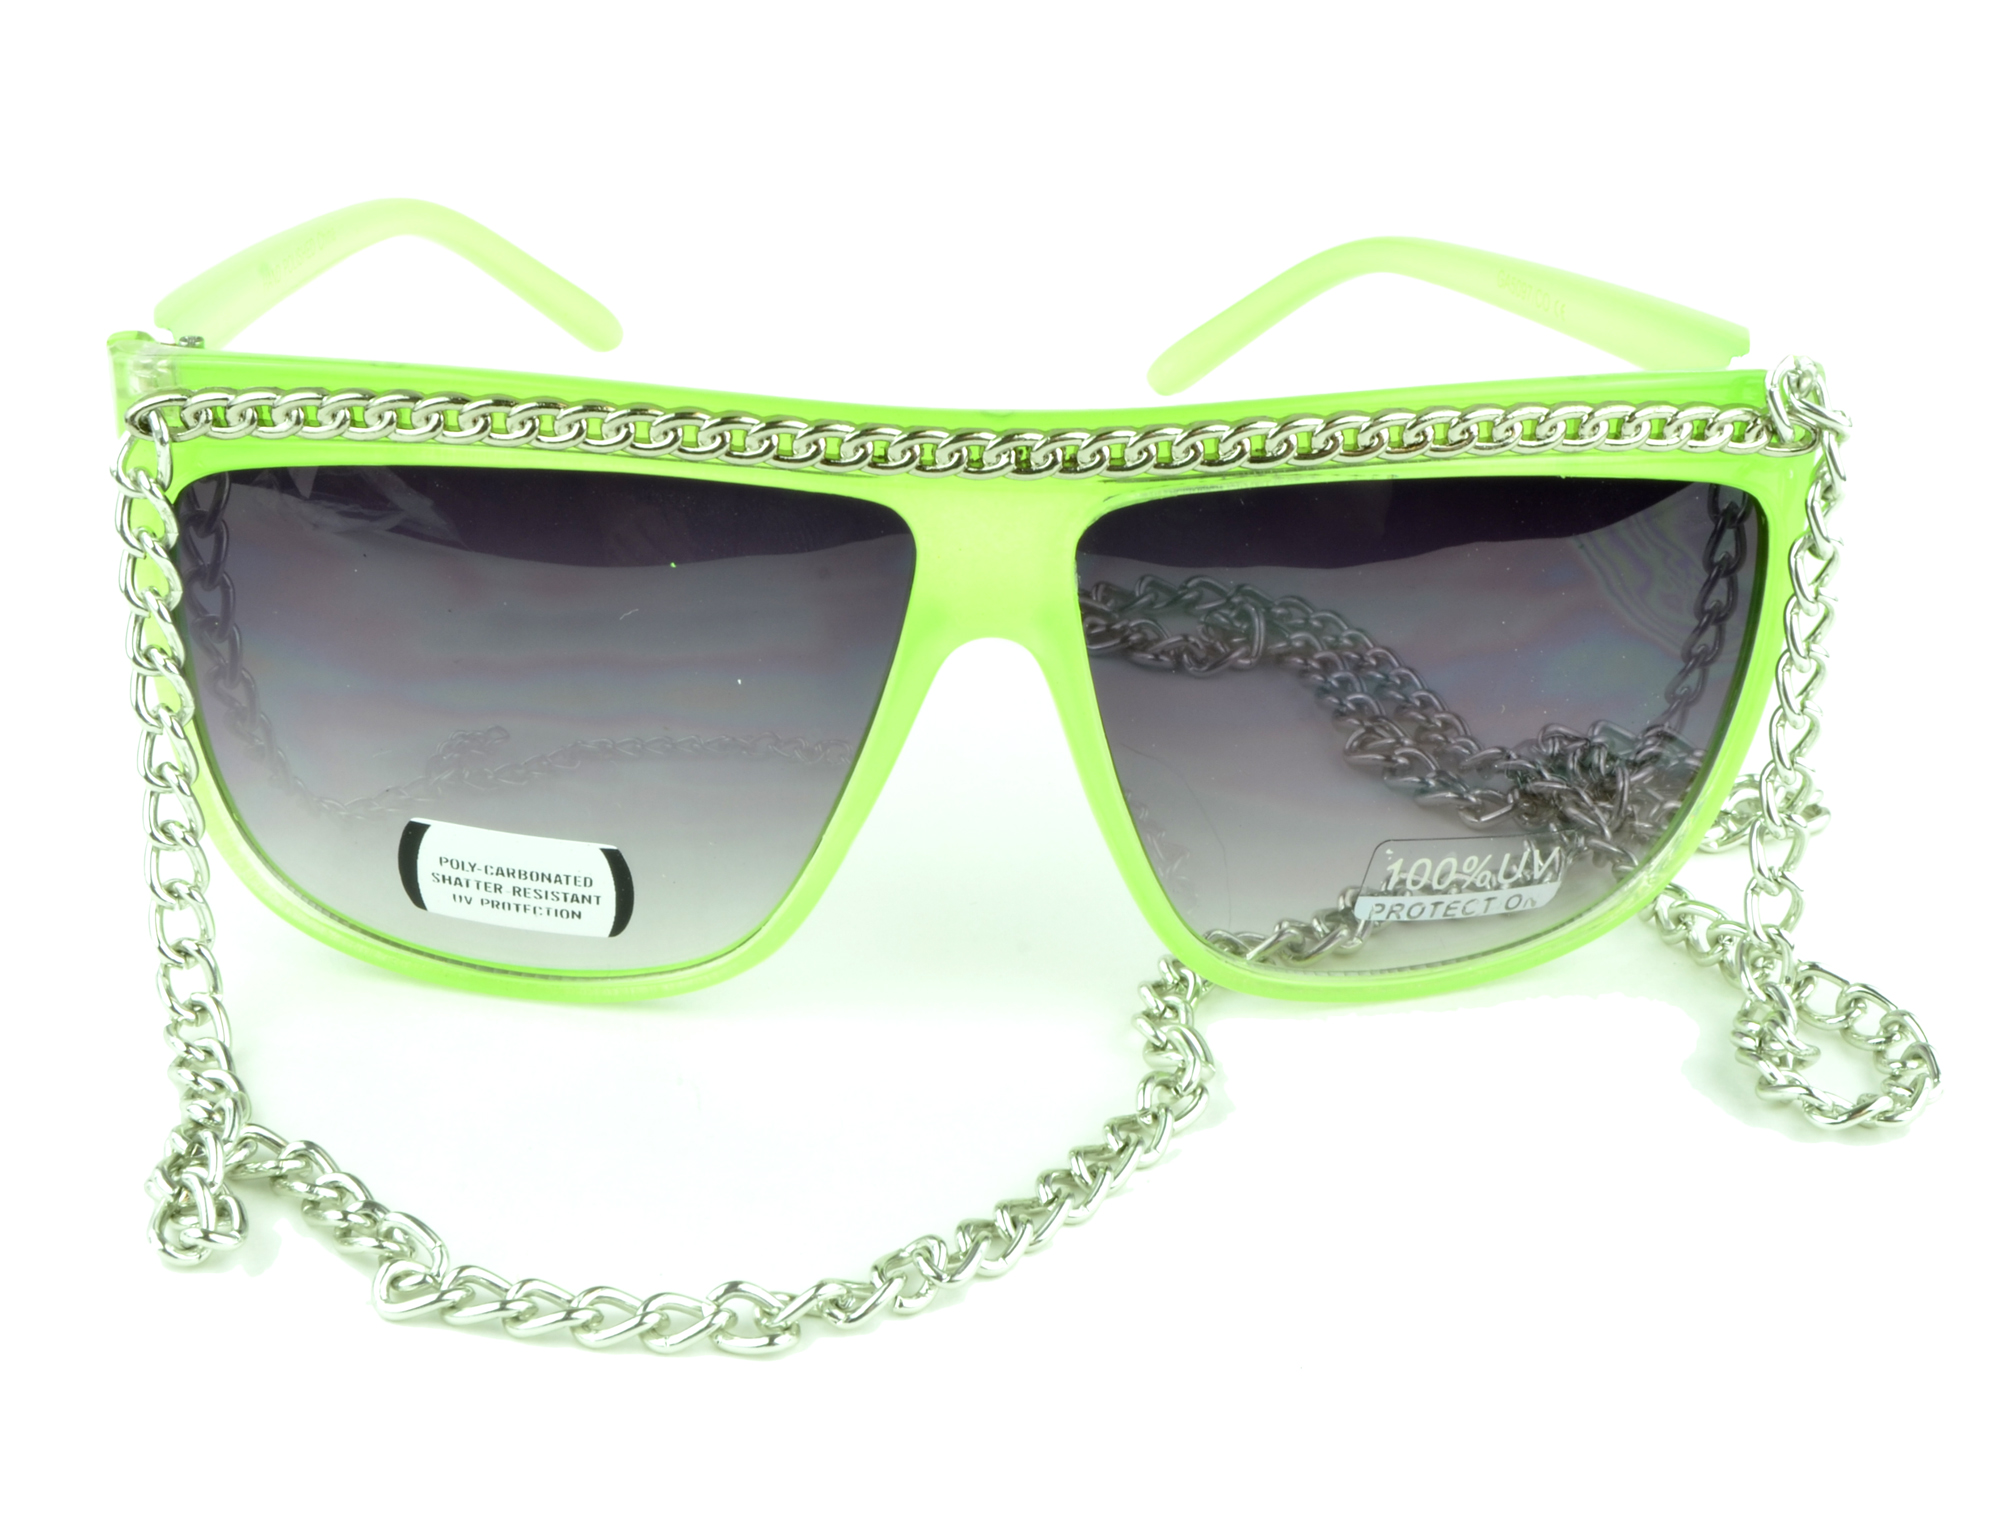 Belle Donne - Women's Hot Celebrity Style Chain Fashion Sunglasses - Green One Size